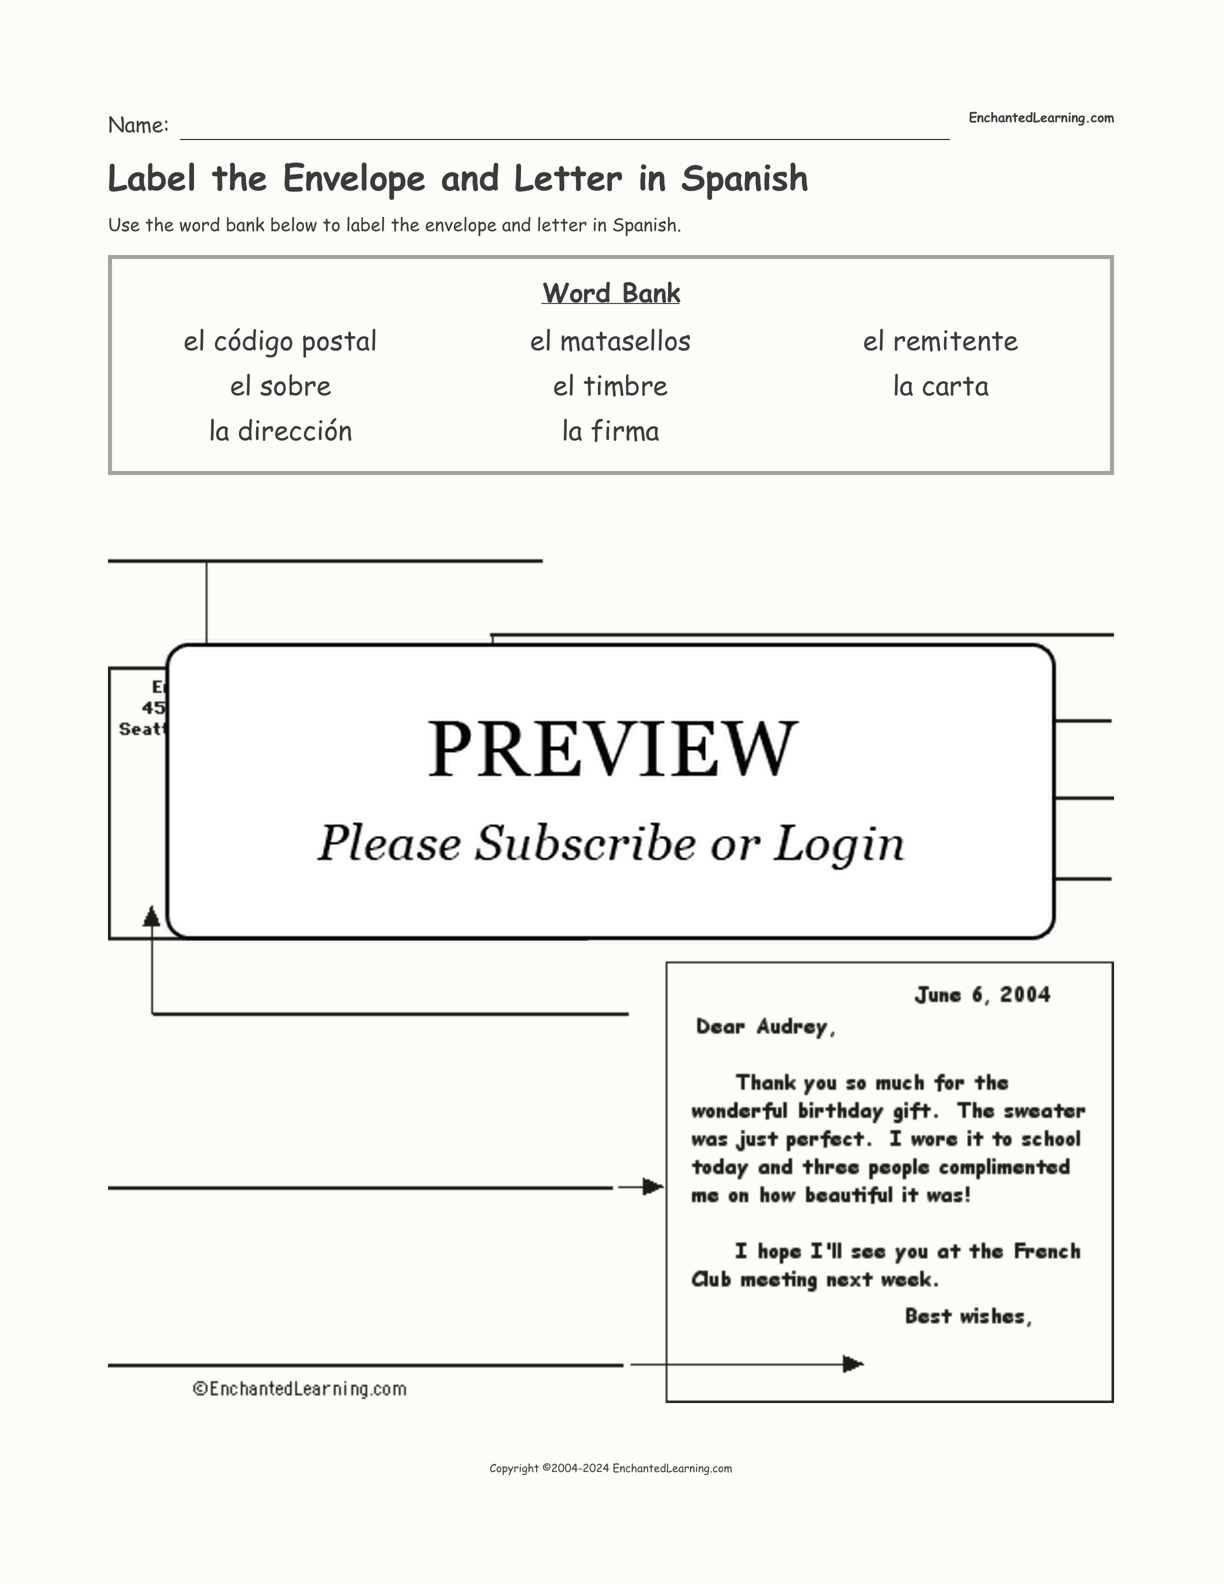 Label the Envelope and Letter in Spanish interactive worksheet page 1